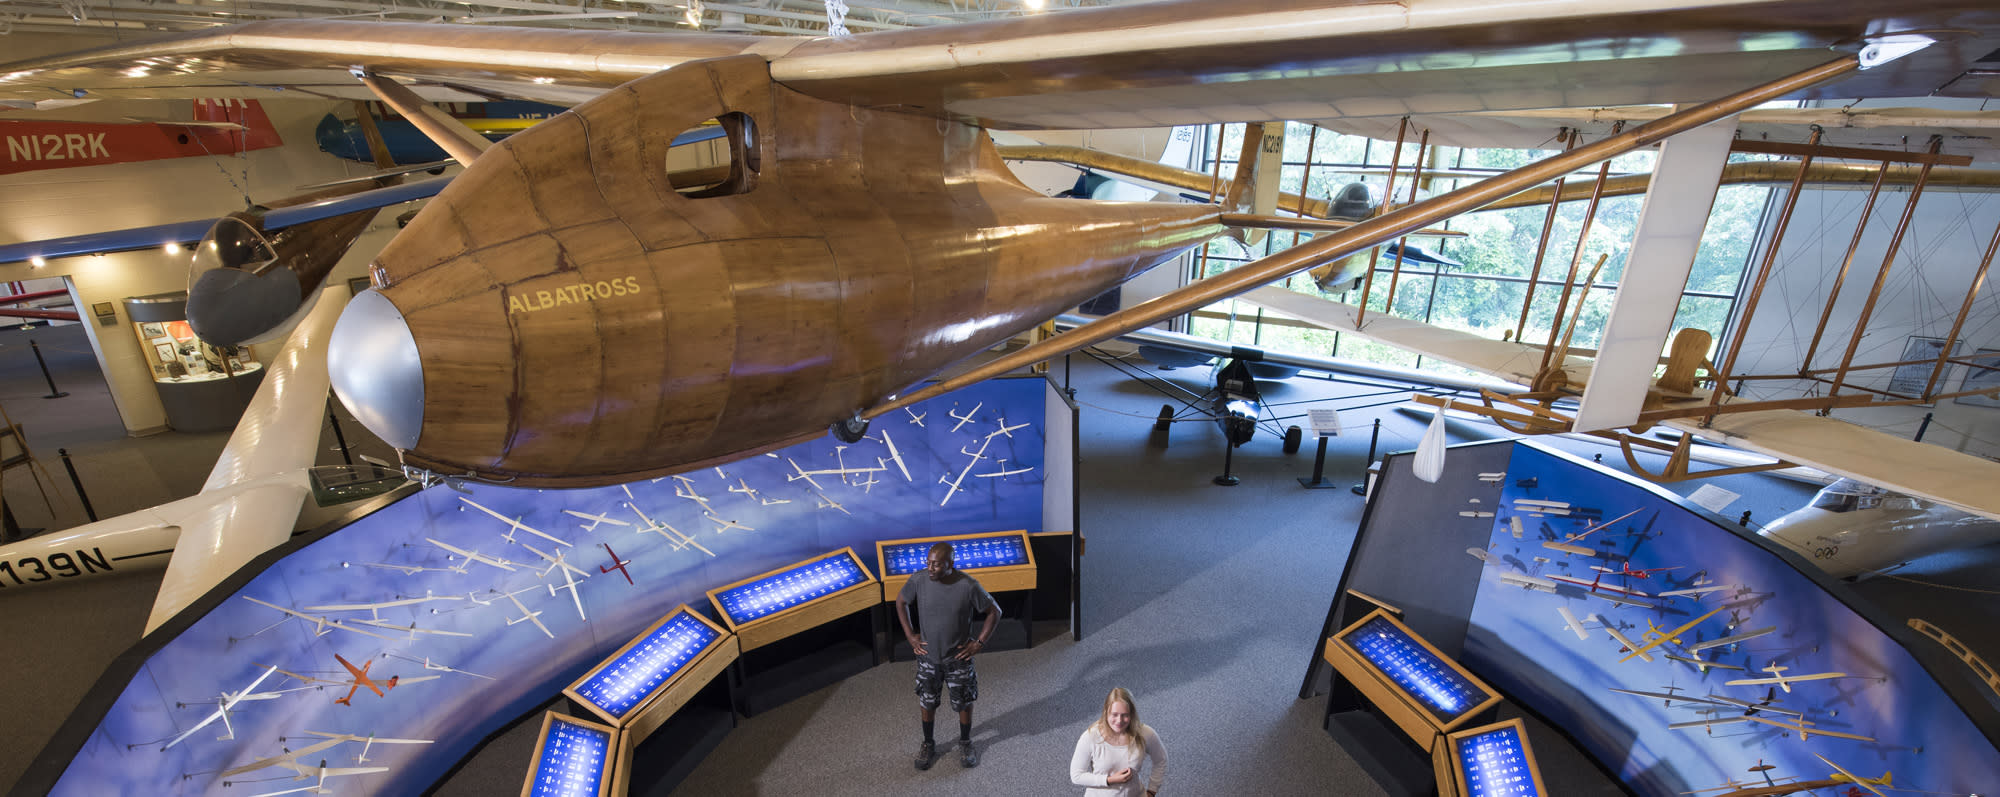 A plane hanging from the ceiling at the National Soaring Museum